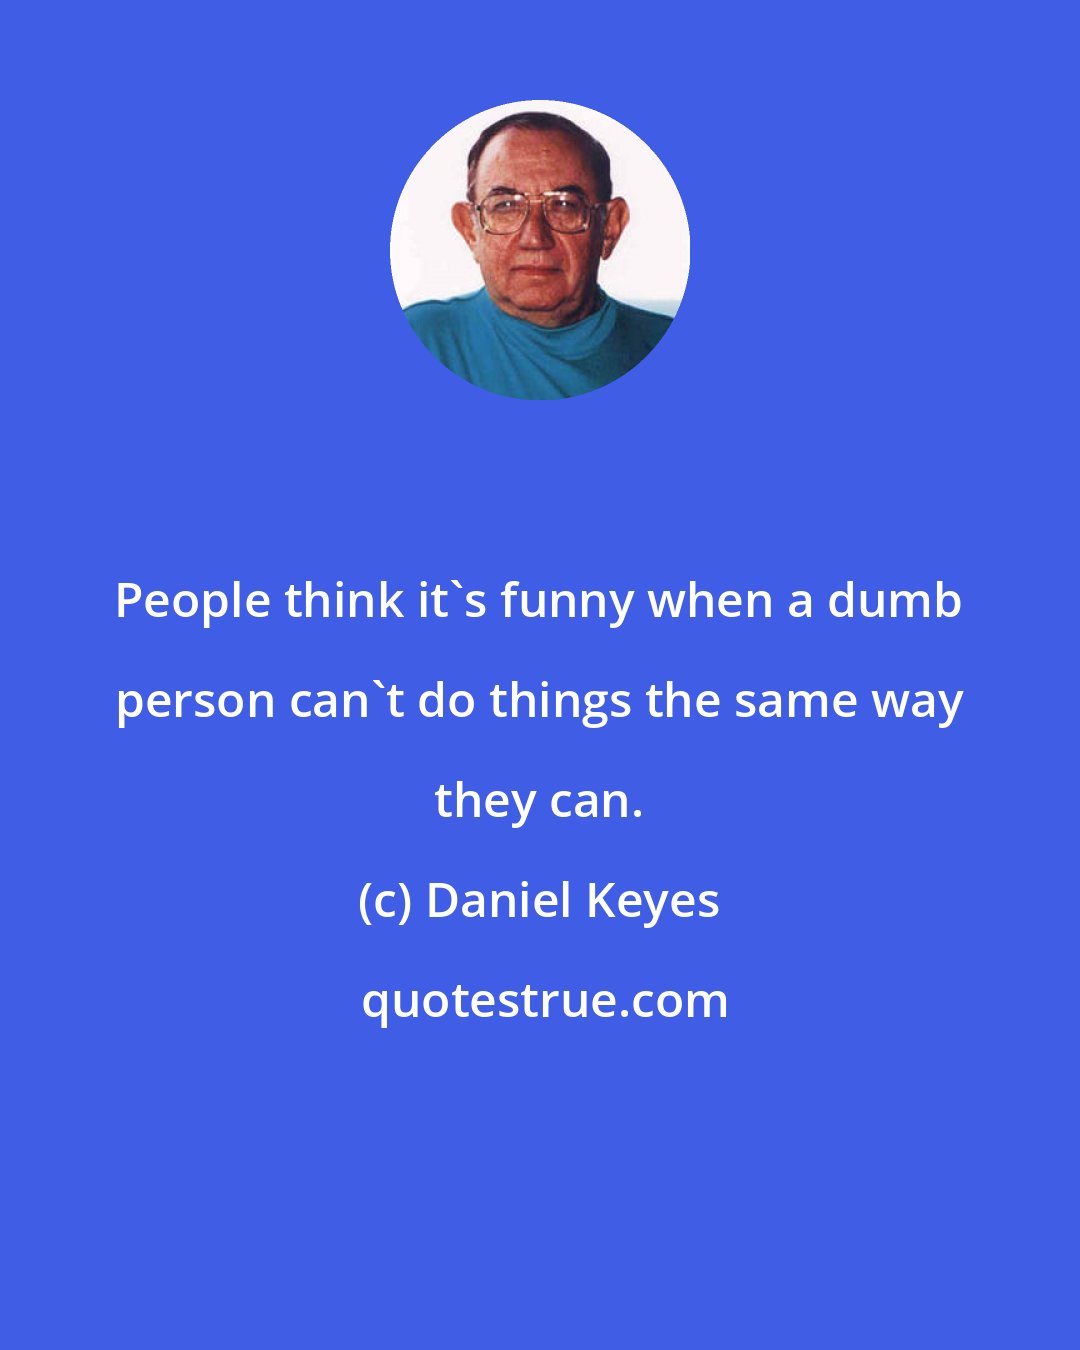 Daniel Keyes: People think it's funny when a dumb person can't do things the same way they can.